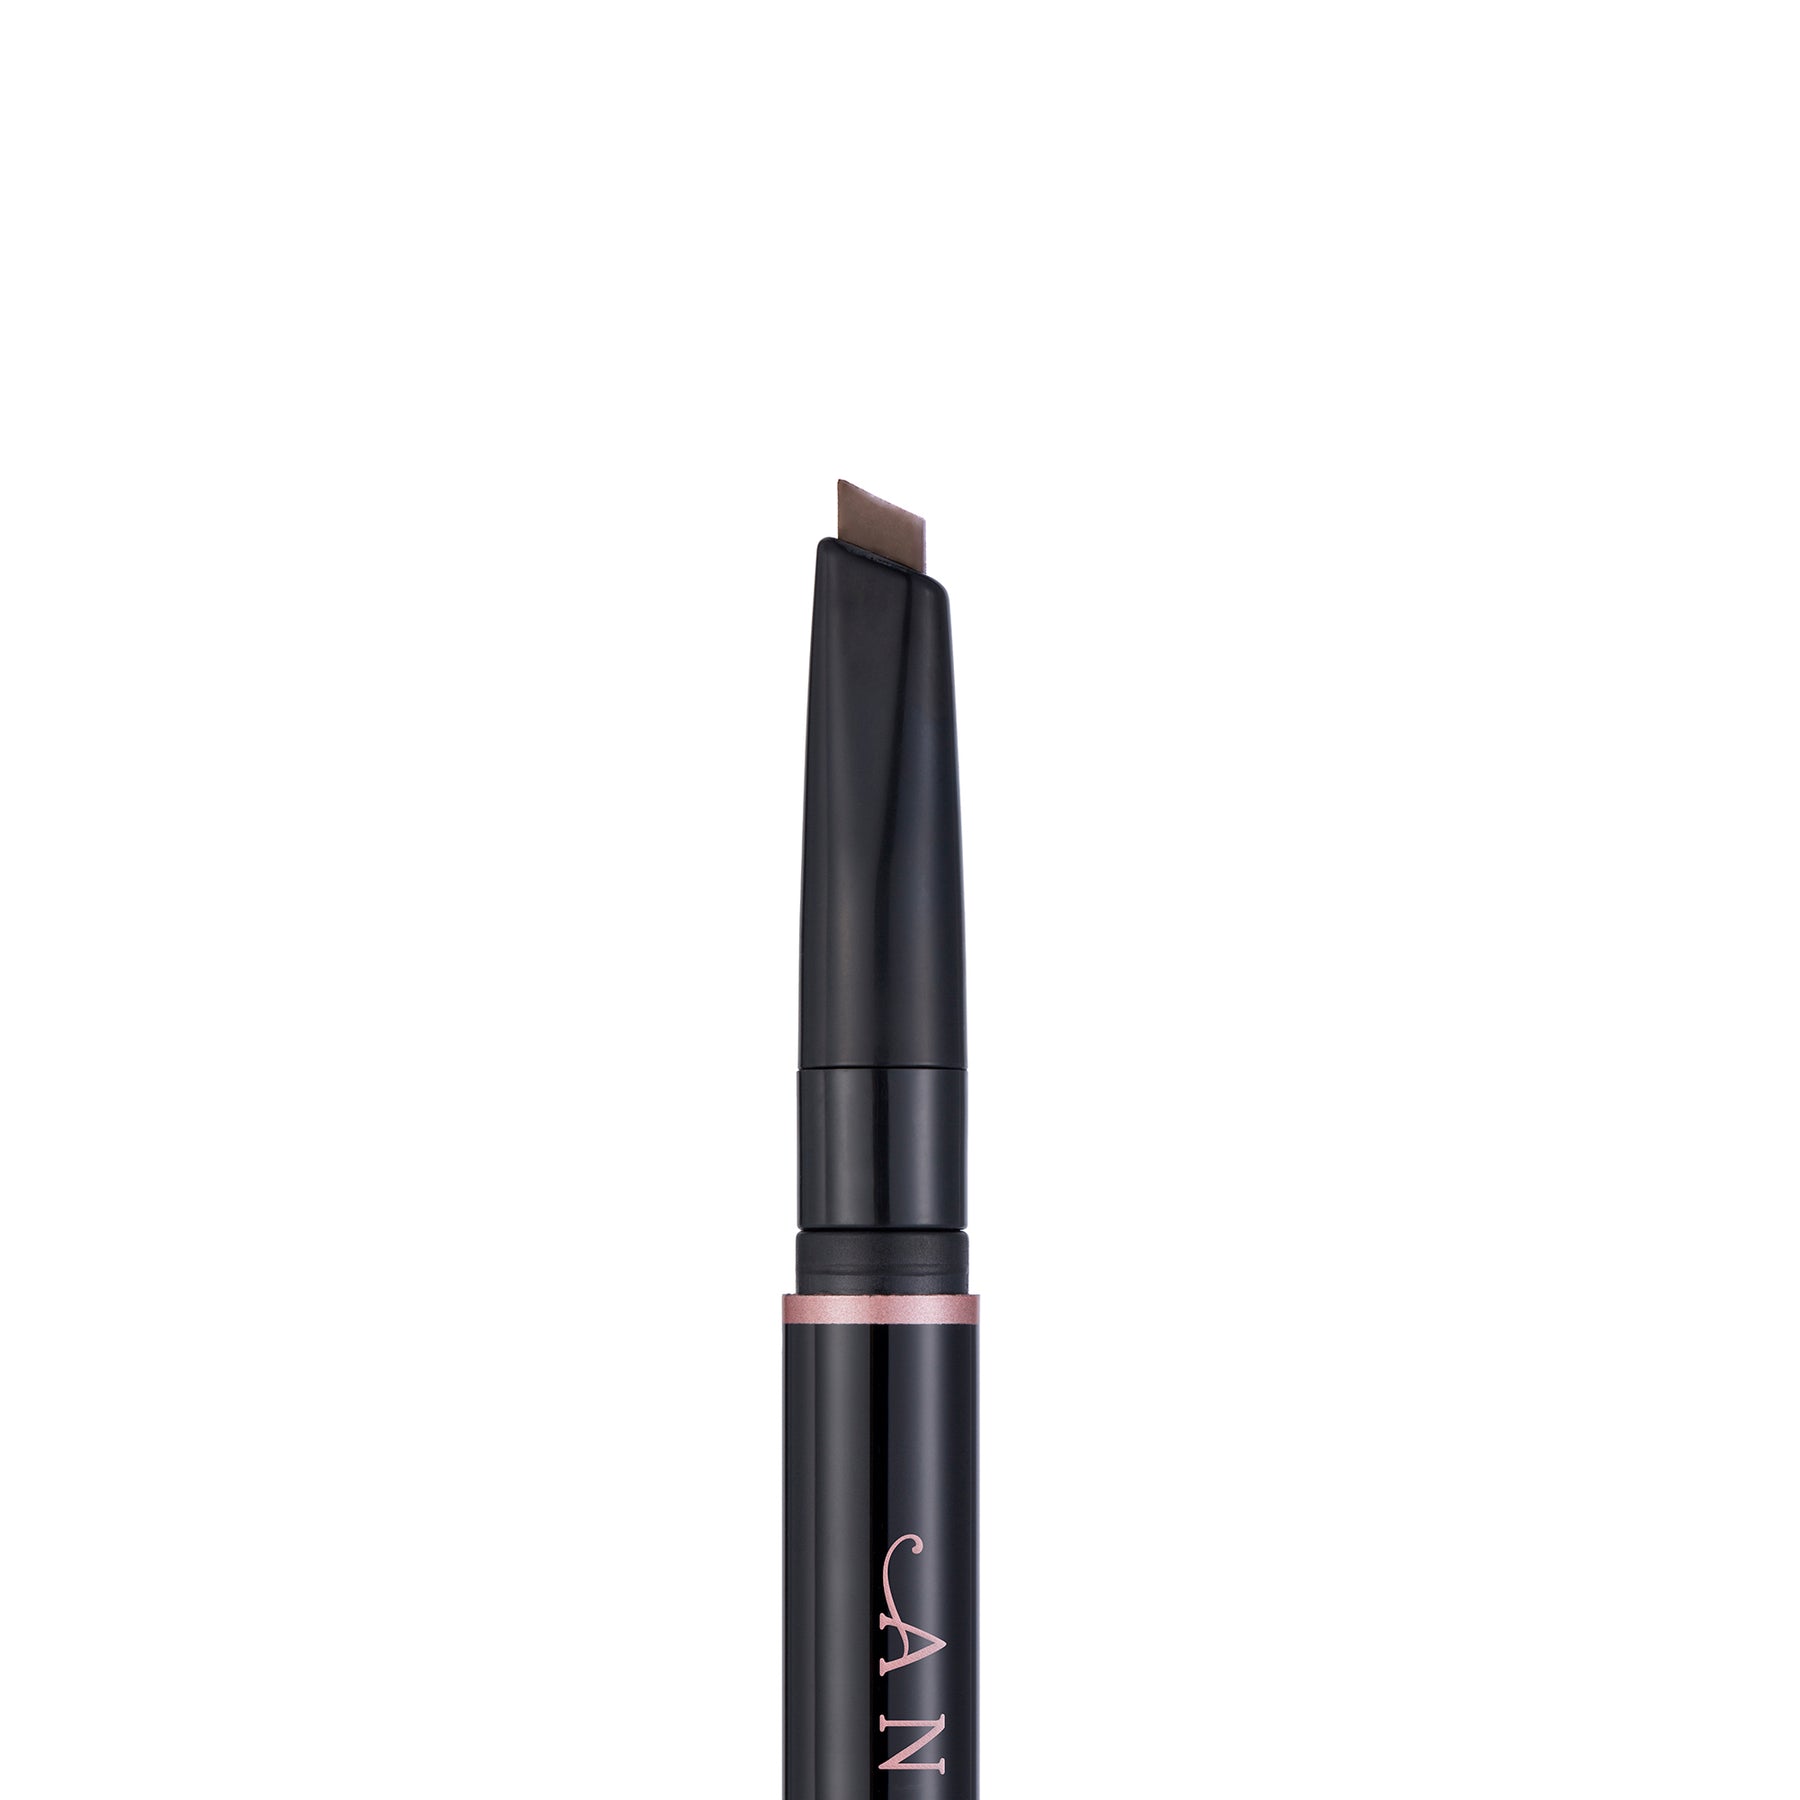 Hills The Editor Anastasia Beauty – Beverly Brow Definer